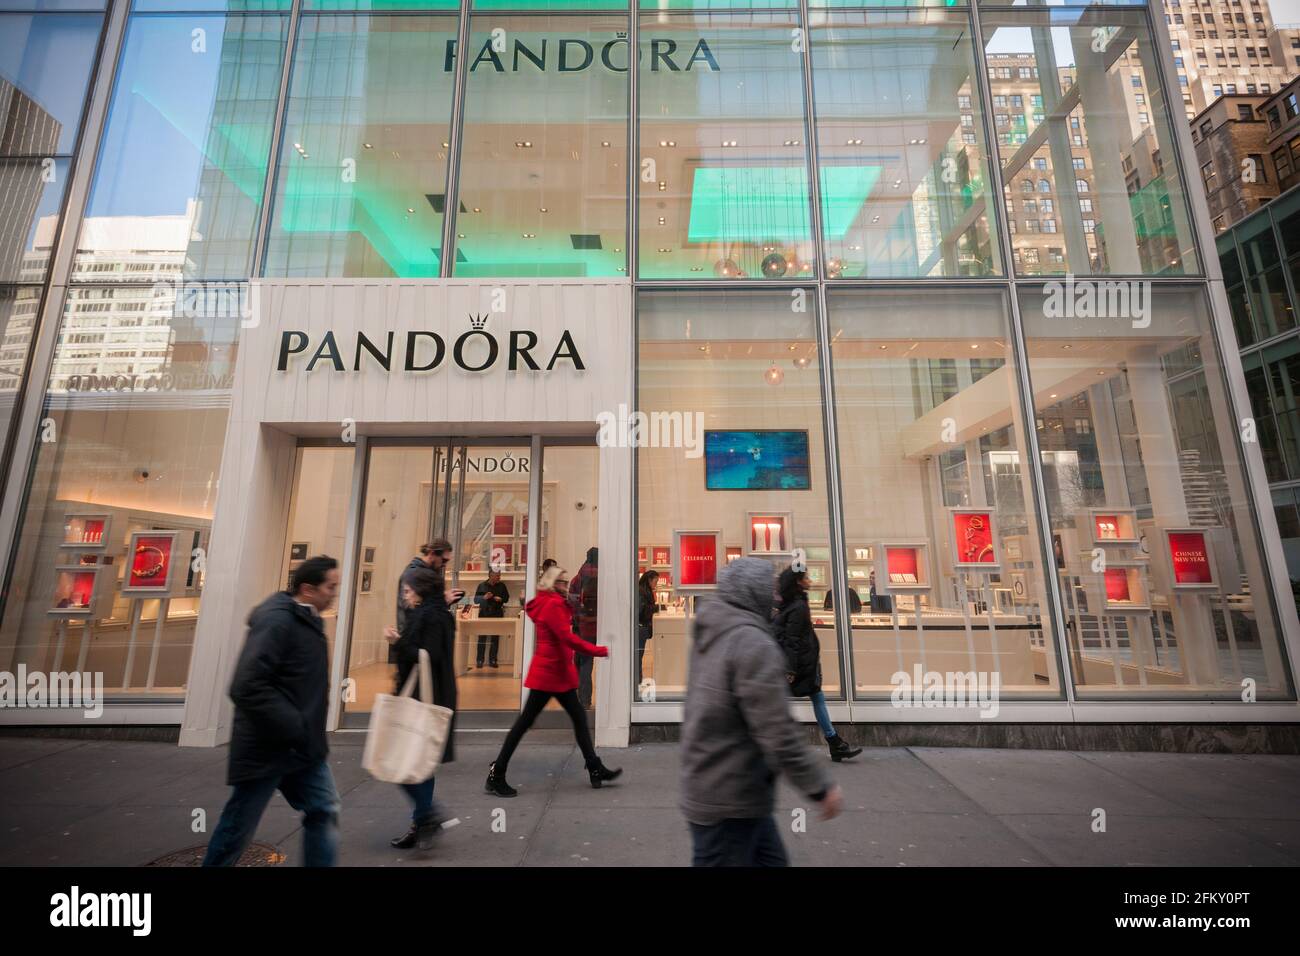 New York, USA. 25th Jan, 2017. A store of the Pandora chain of jewelry stores in Midtown in New York on Wednesday, January 25, 2017. Pandora, a Danish company, is mostly associated with their charm bracelets. Pandora is reported to be doing well in China. As luxury spending winds down in China Pandora appeals to a younger demographic with less disposable income. (Photo by Richard B. Levine) Credit: Sipa USA/Alamy Live News Stock Photo